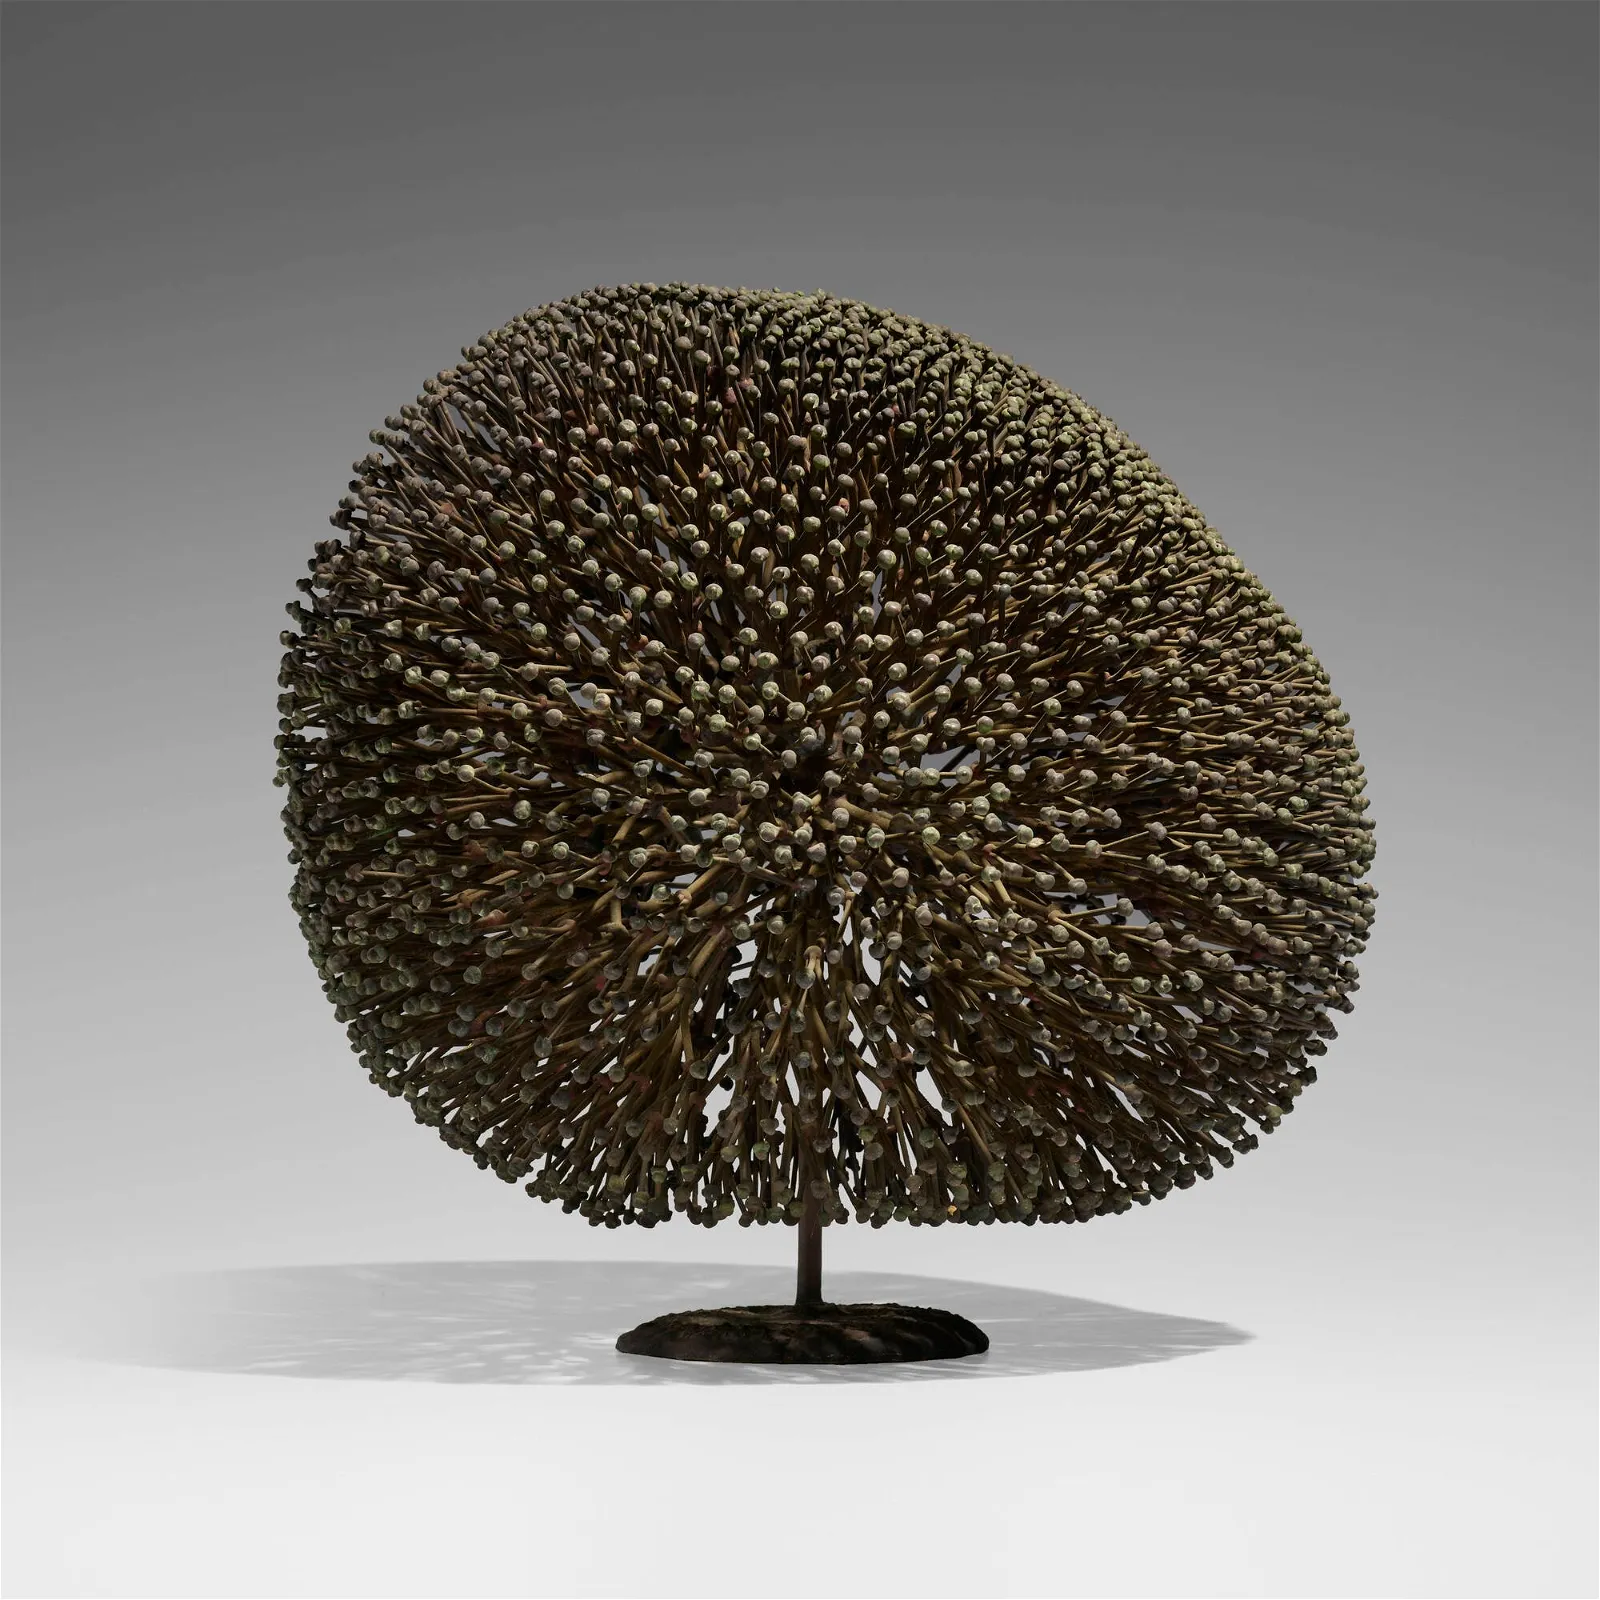 Harry Bertoia, ‘Untitled (Bush Form),’ which sold for $131,000 with buyer’s premium at Rago.